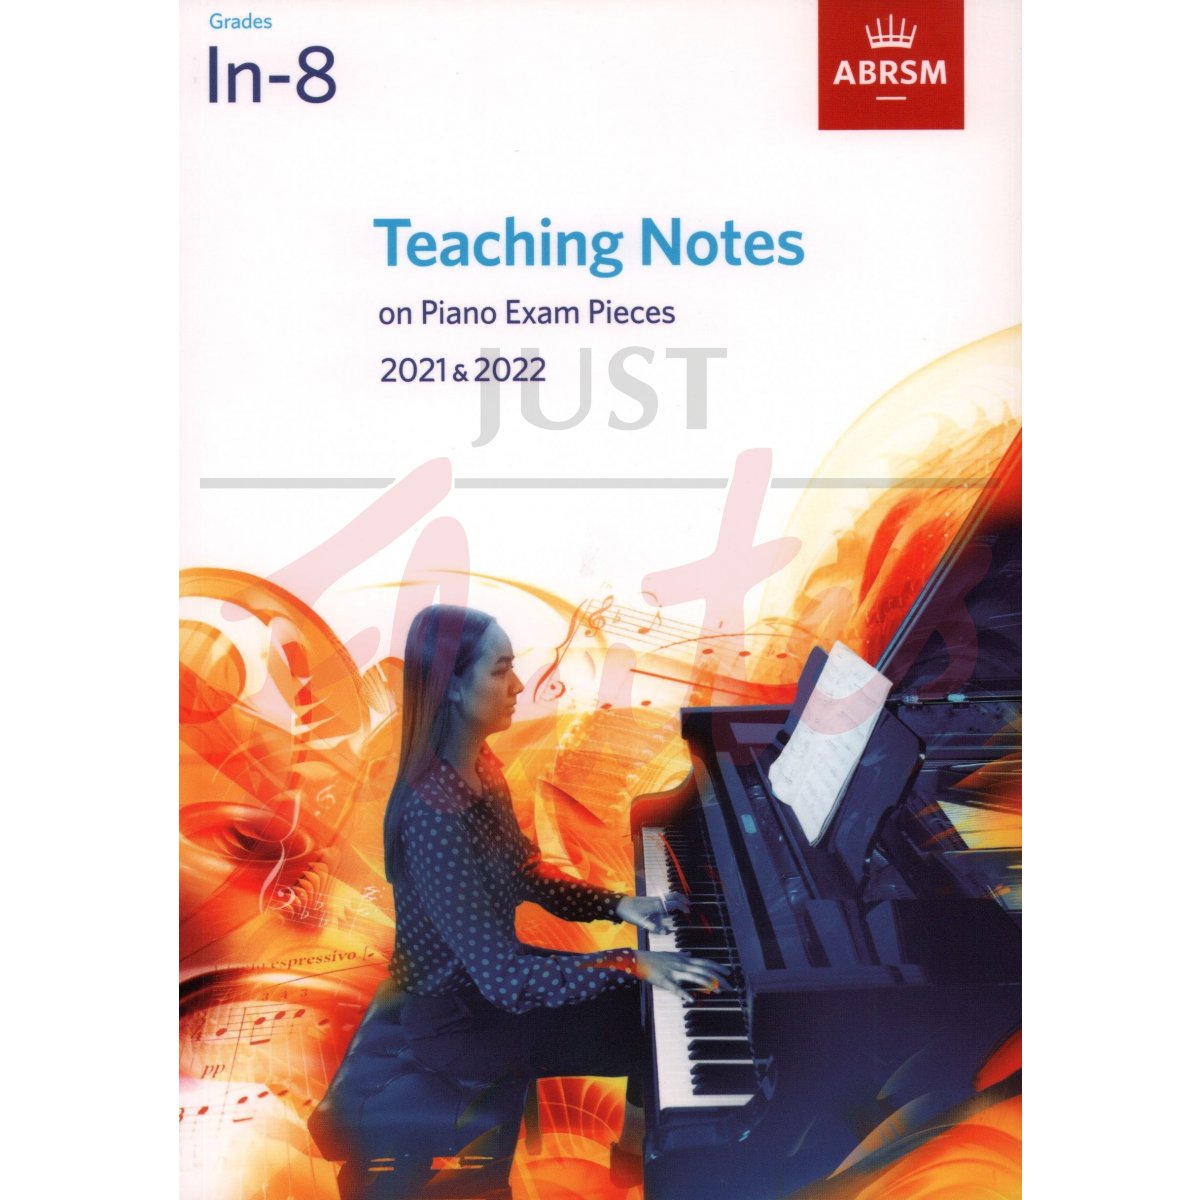 Teaching Notes On Piano Exam Pieces Grades In-8 2021 &amp; 2022